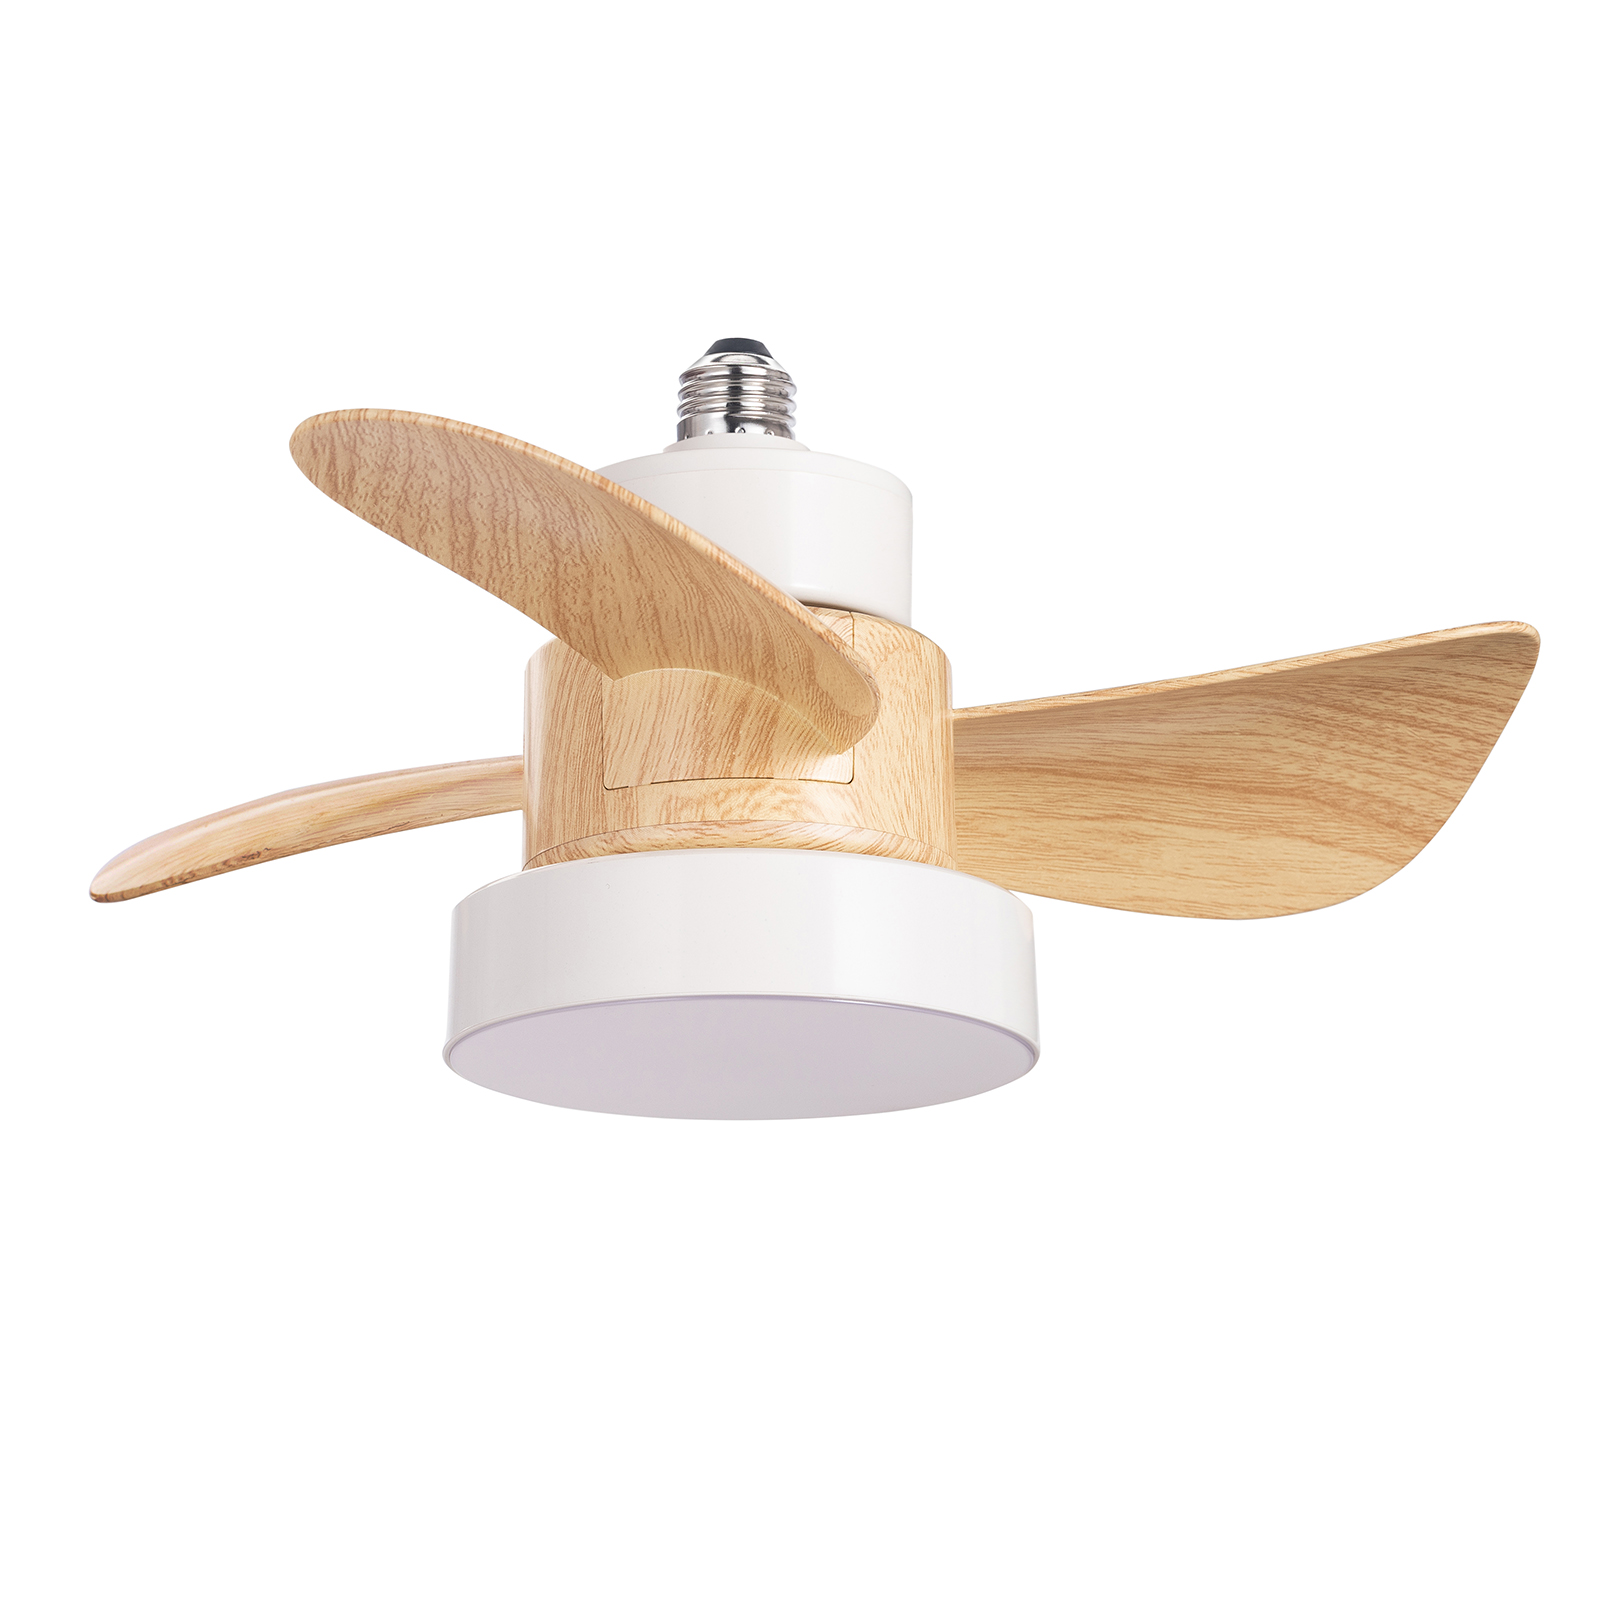 LED fan lamp E27 lamp head fan private model products have multinational patents